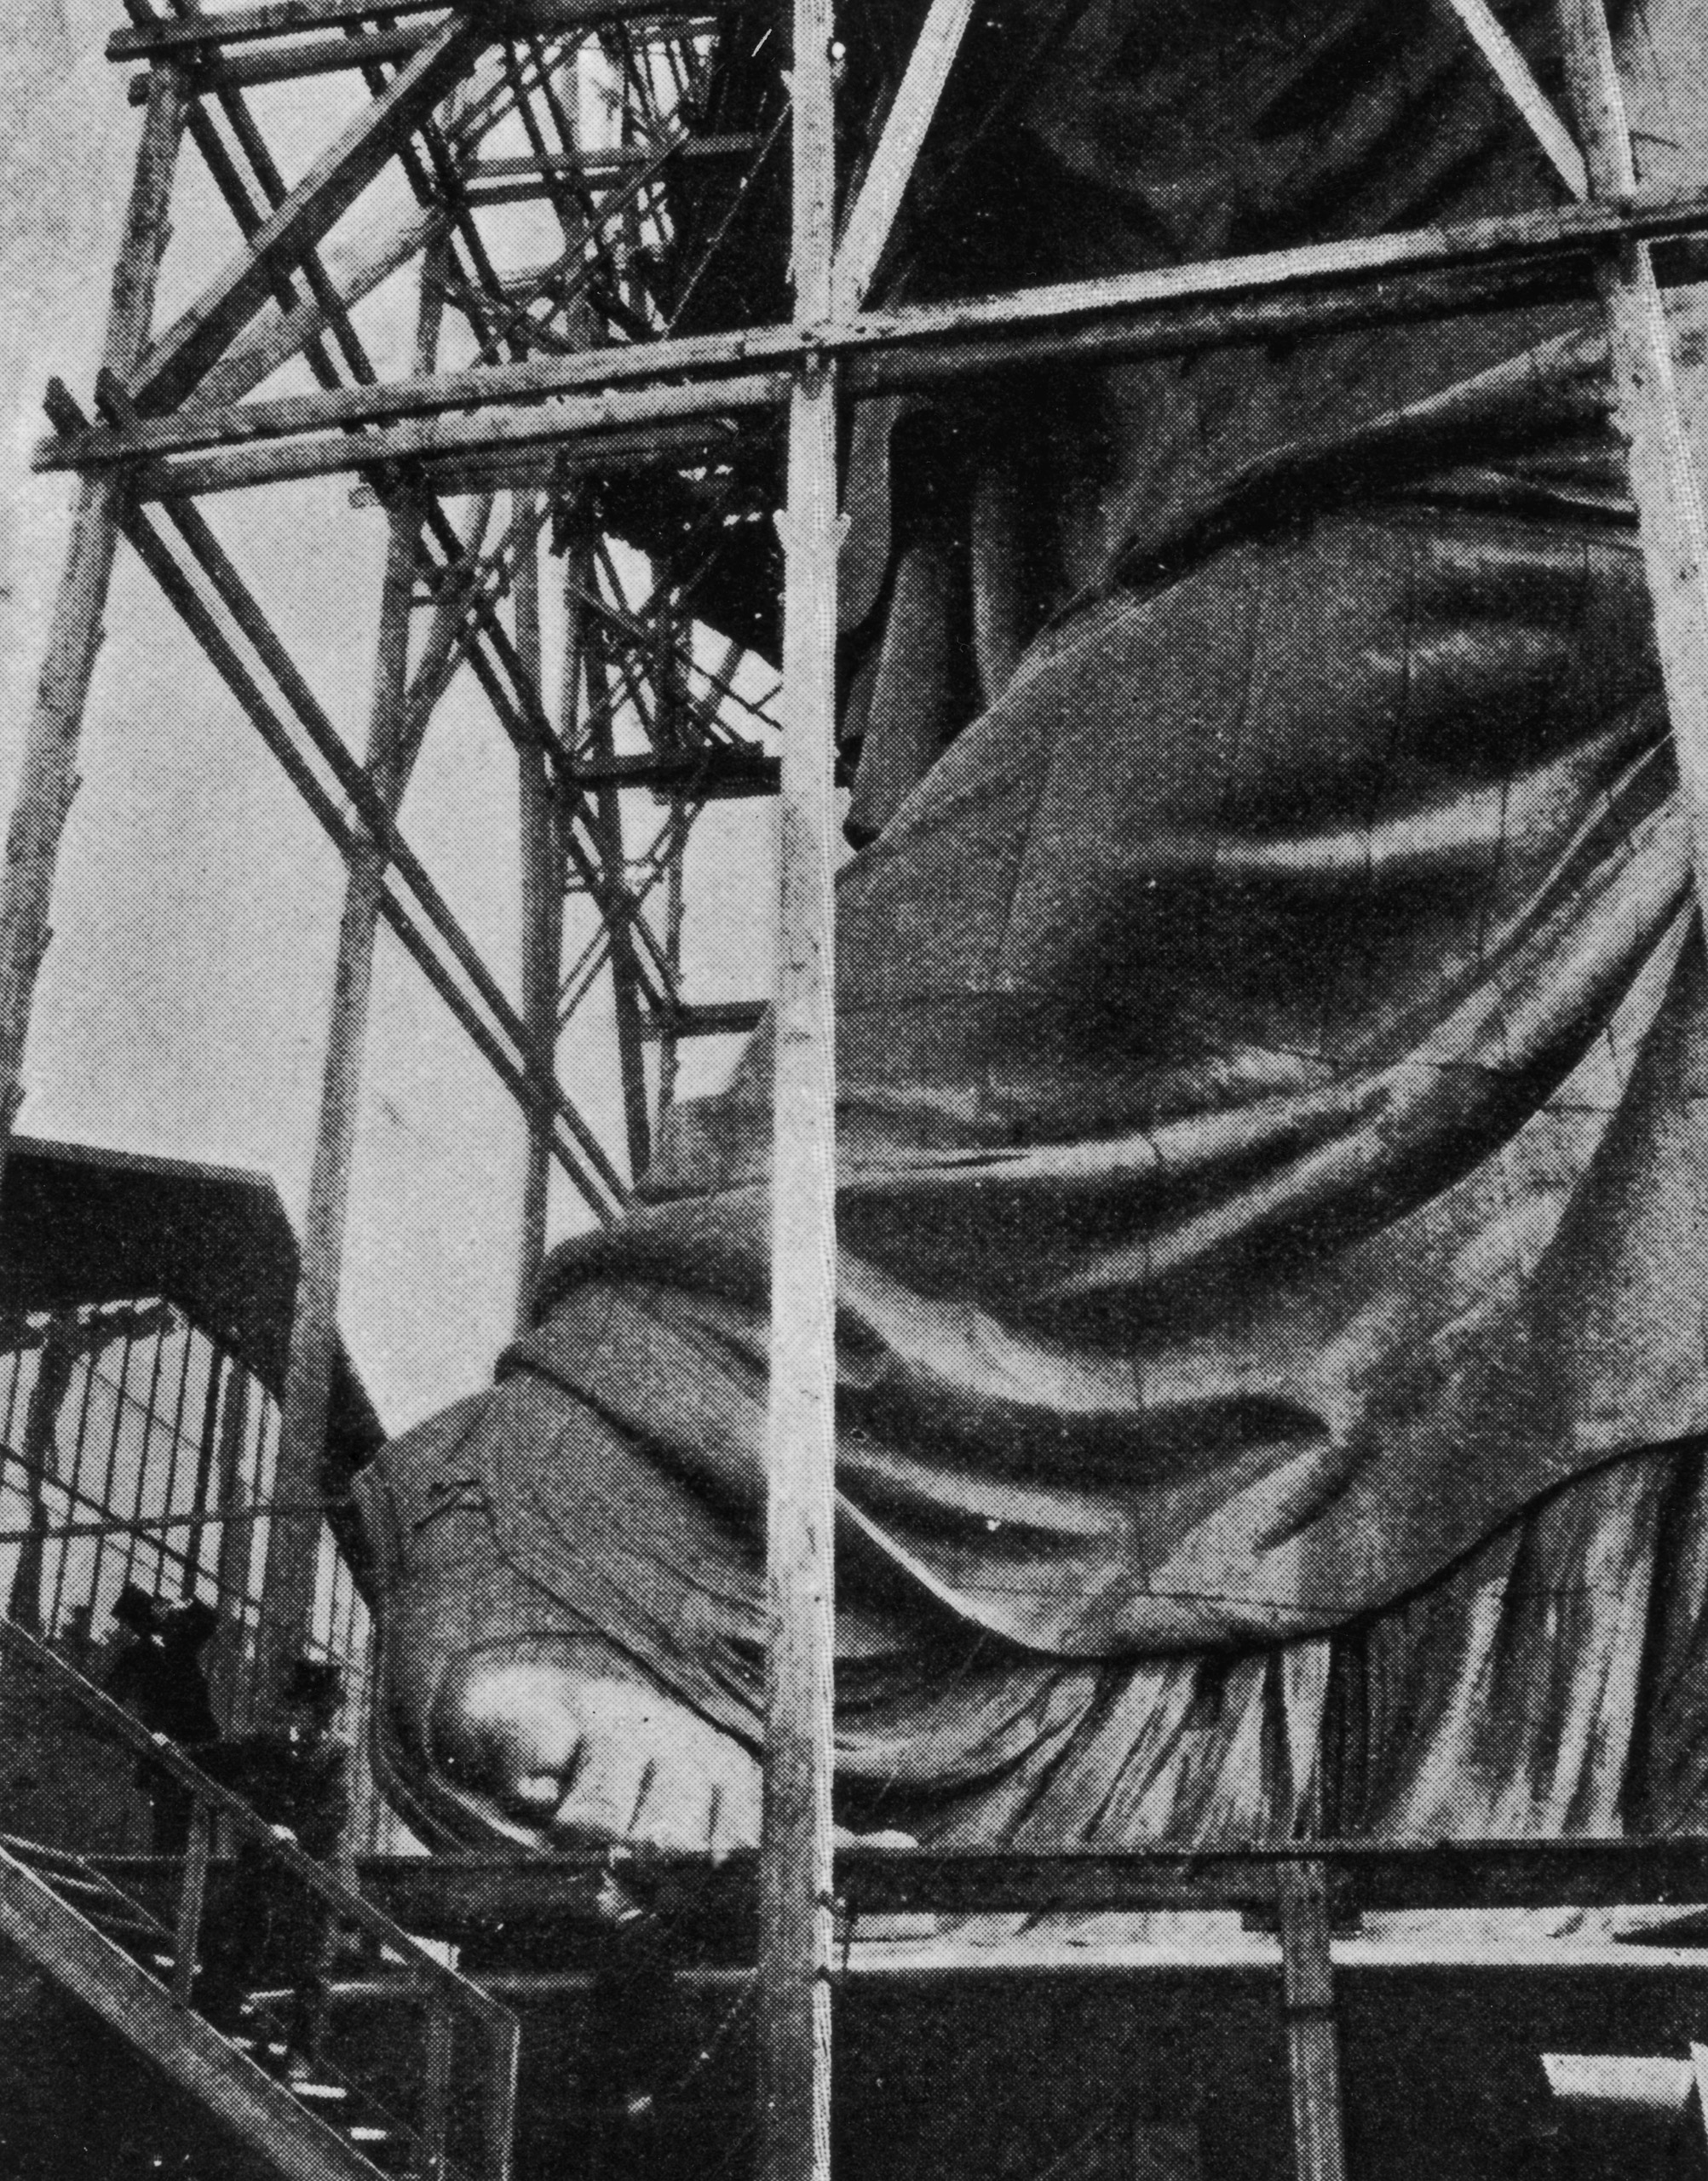 circa 1883: The construction of the Statue of Liberty in Paris, before its journey to the United States.